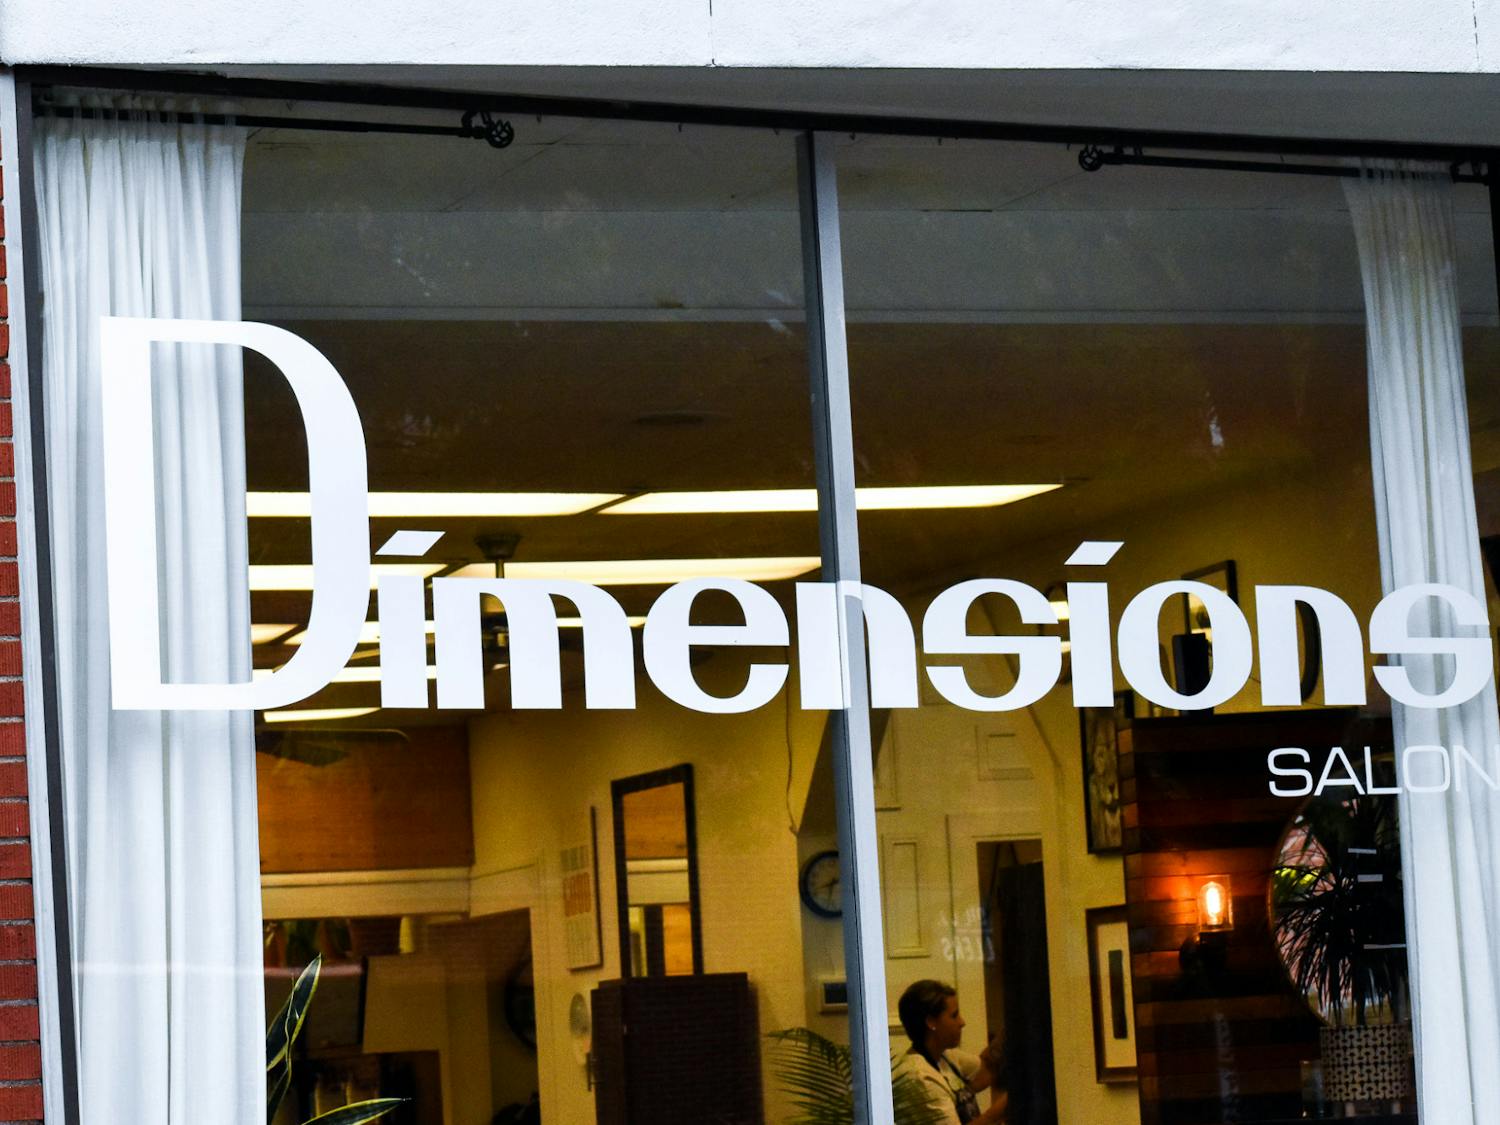 Plainsman's Choice for Best Place to Get a Haircut - Dimensions